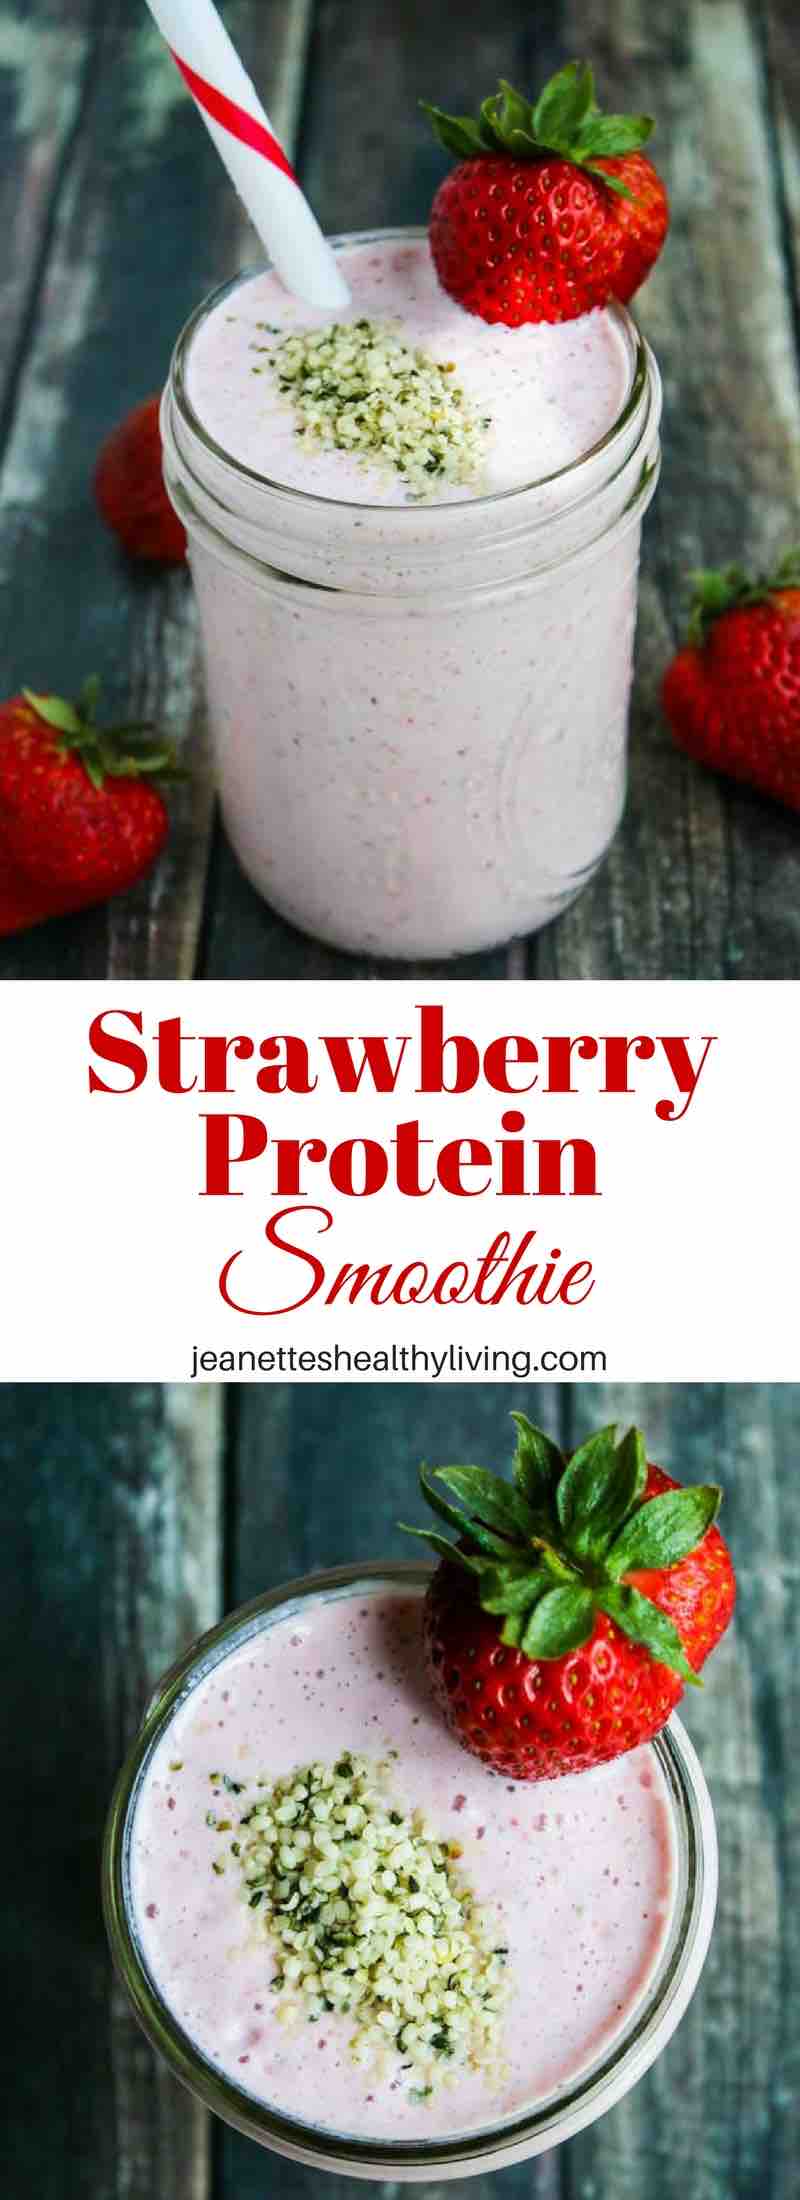 Strawberry Protein Smoothie - this healthy smoothie packs in 27.5 grams of protein with no protein powder